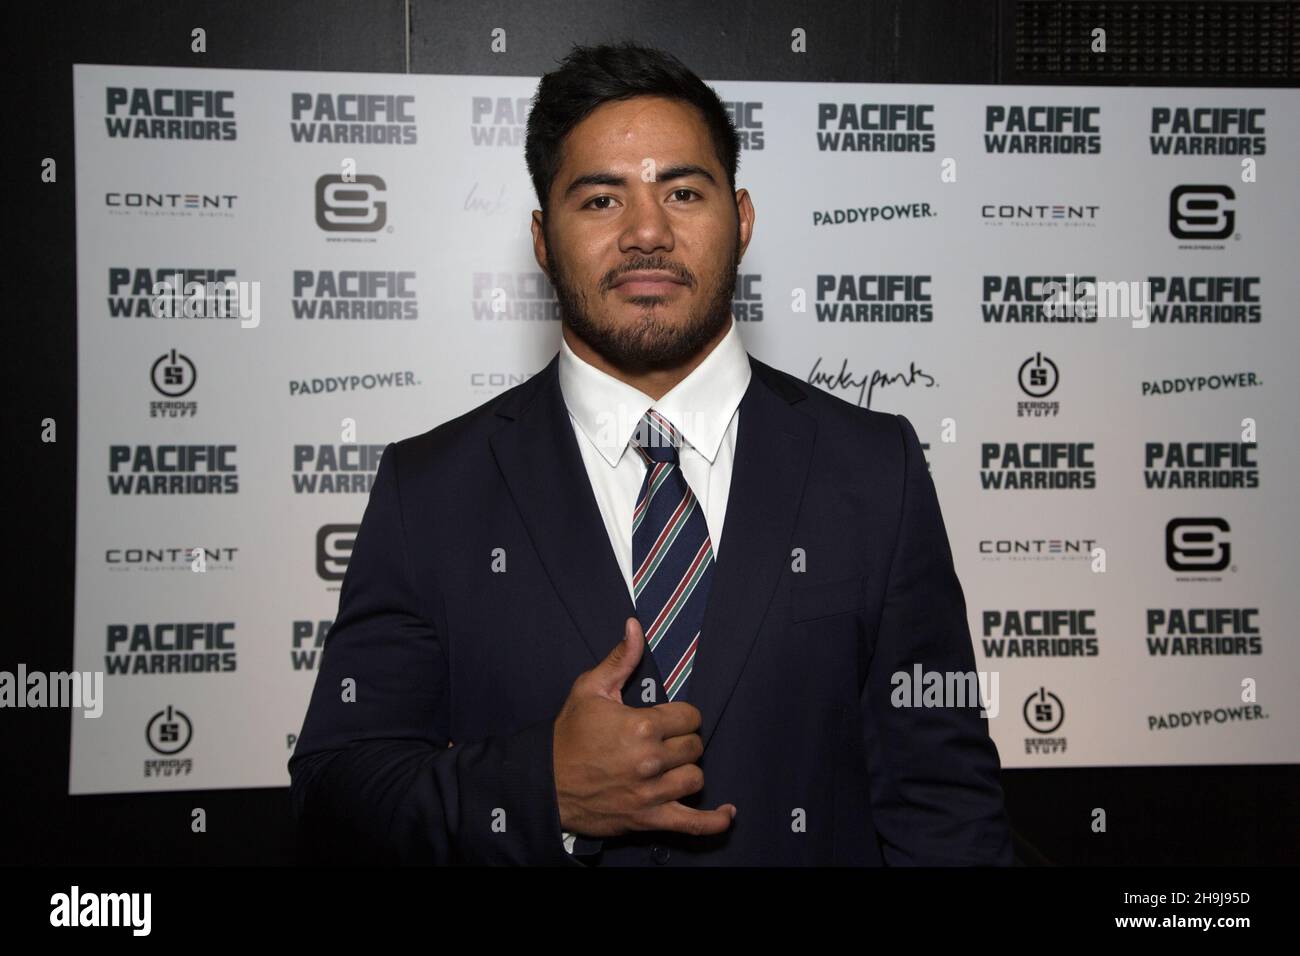 Manu Tuilagi arrives at the Curzon Cinema in London's Shaftesbury Avenue to attend the opening night of Pacific Warriors, about the culture of rugby in Somao and Tonga by director Adam Perrin Stock Photo